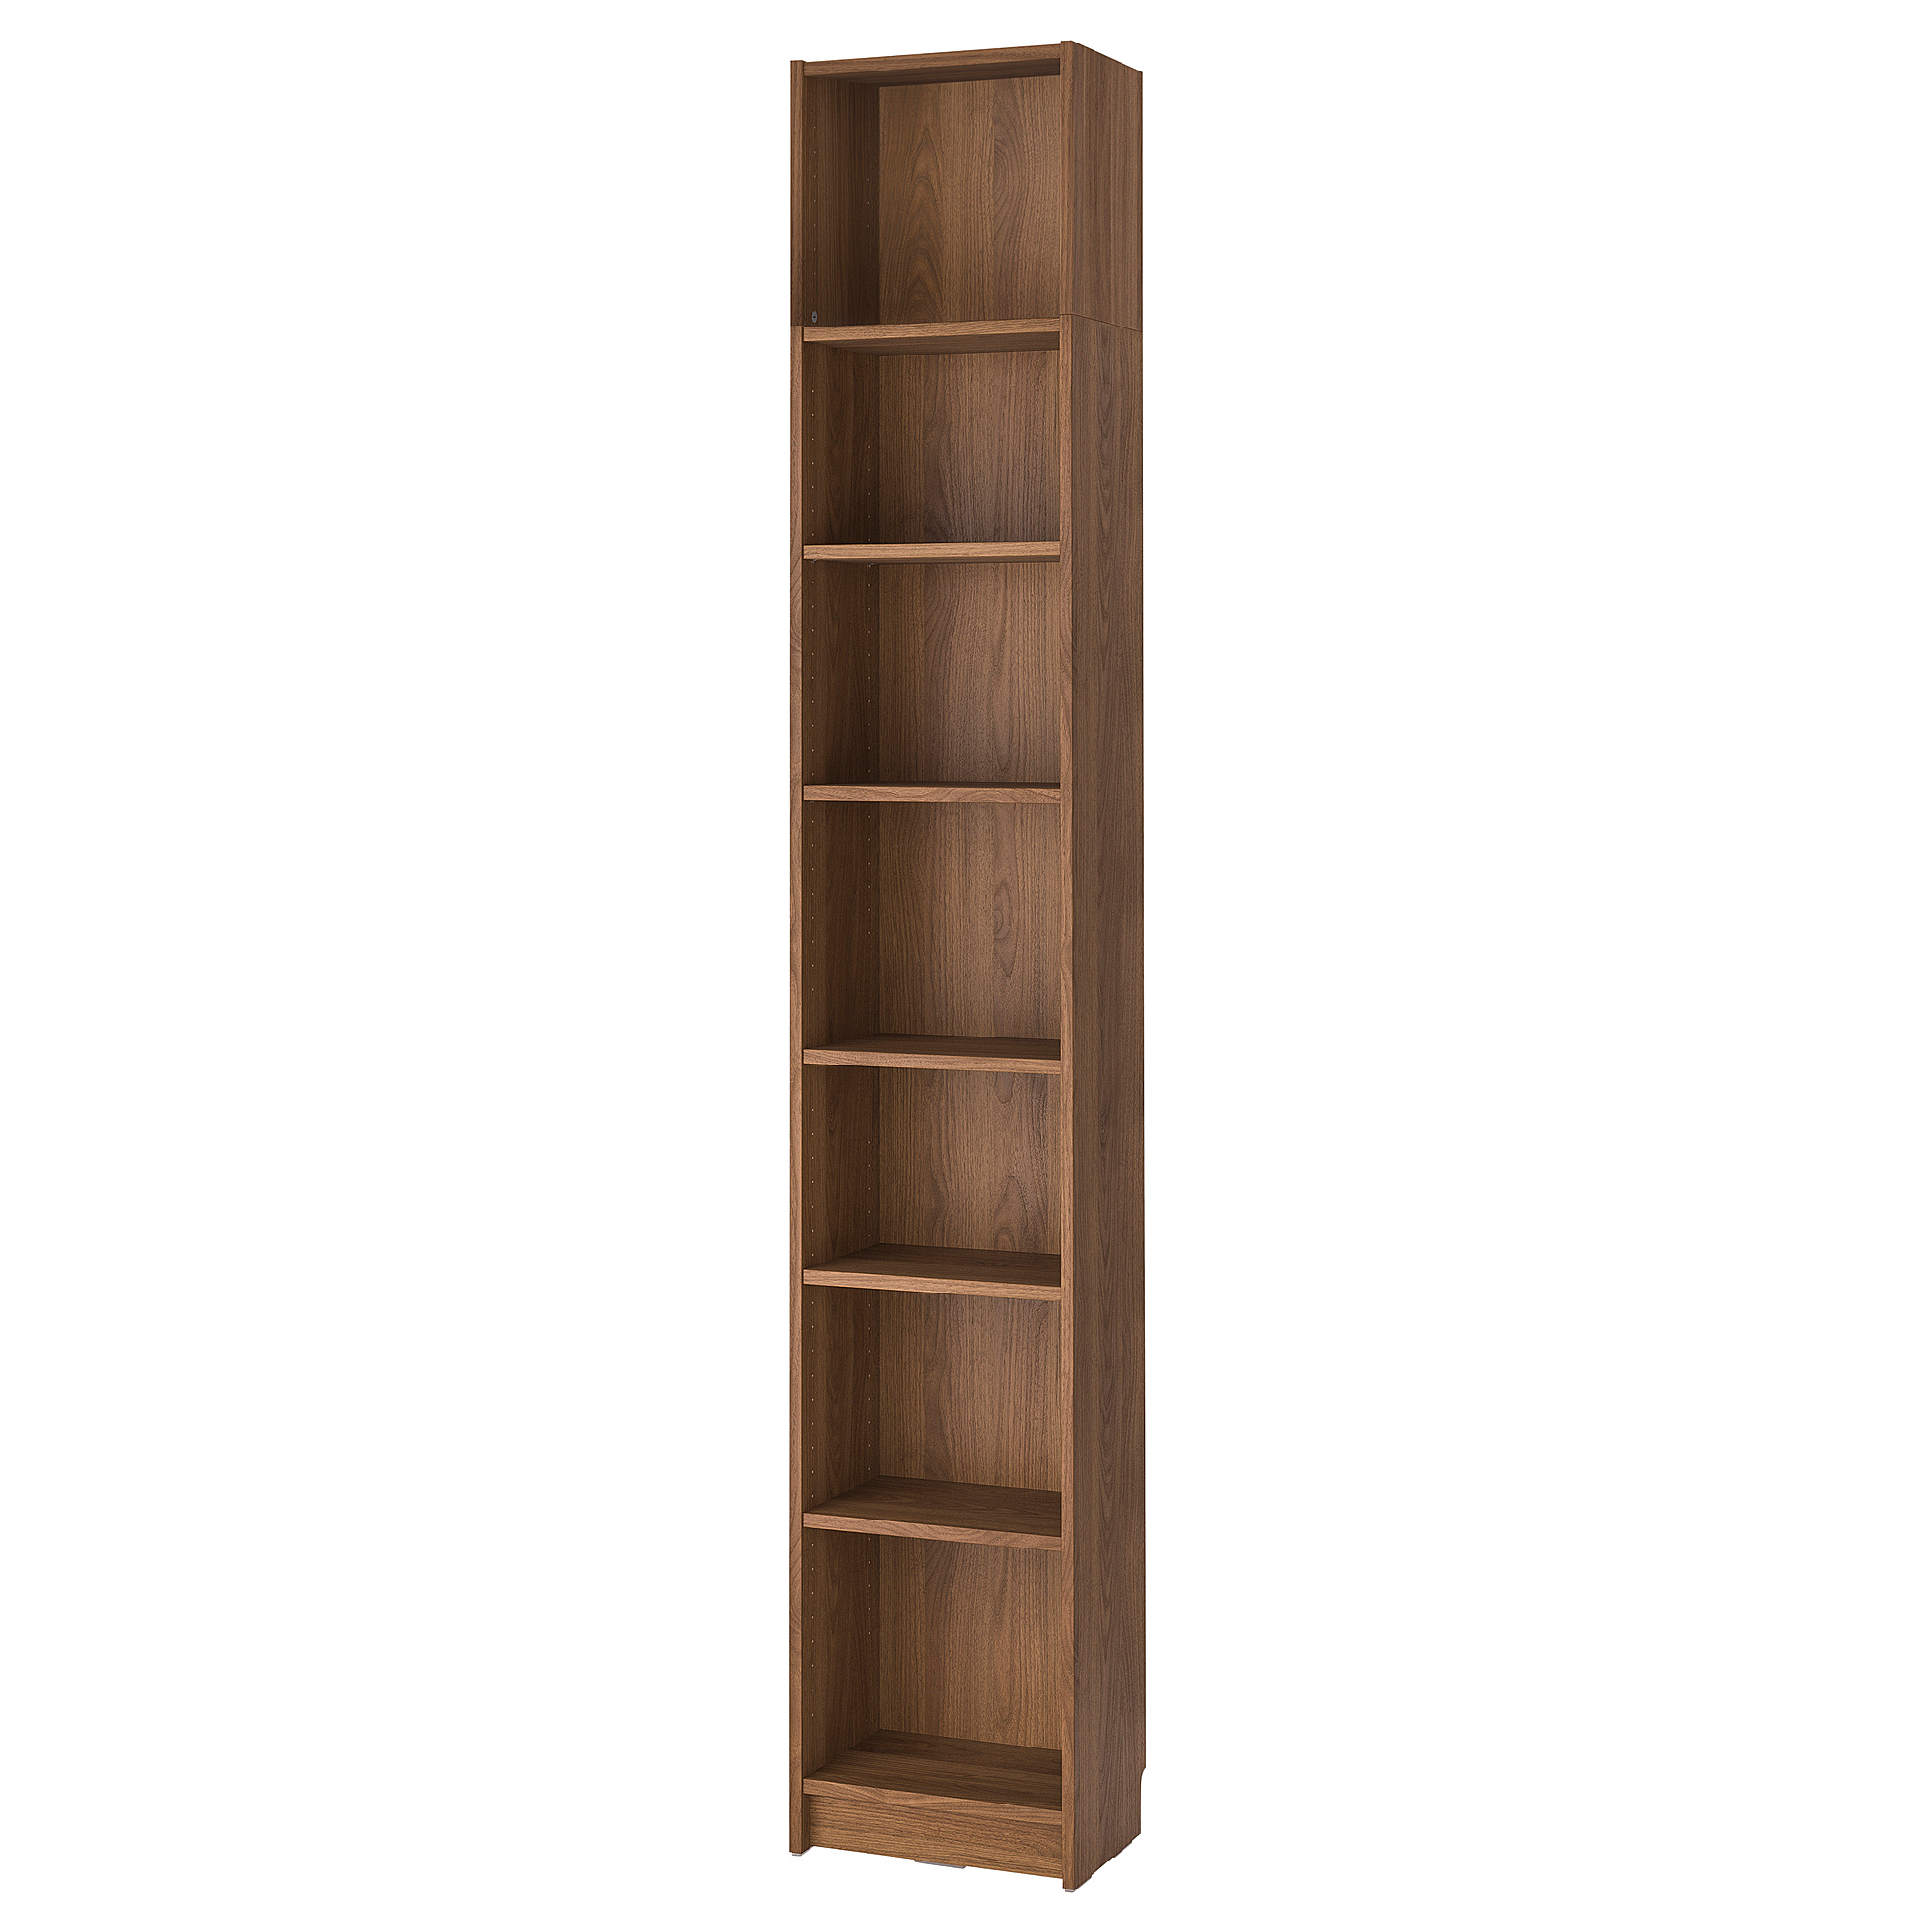 BILLY bookcase with height extension unit